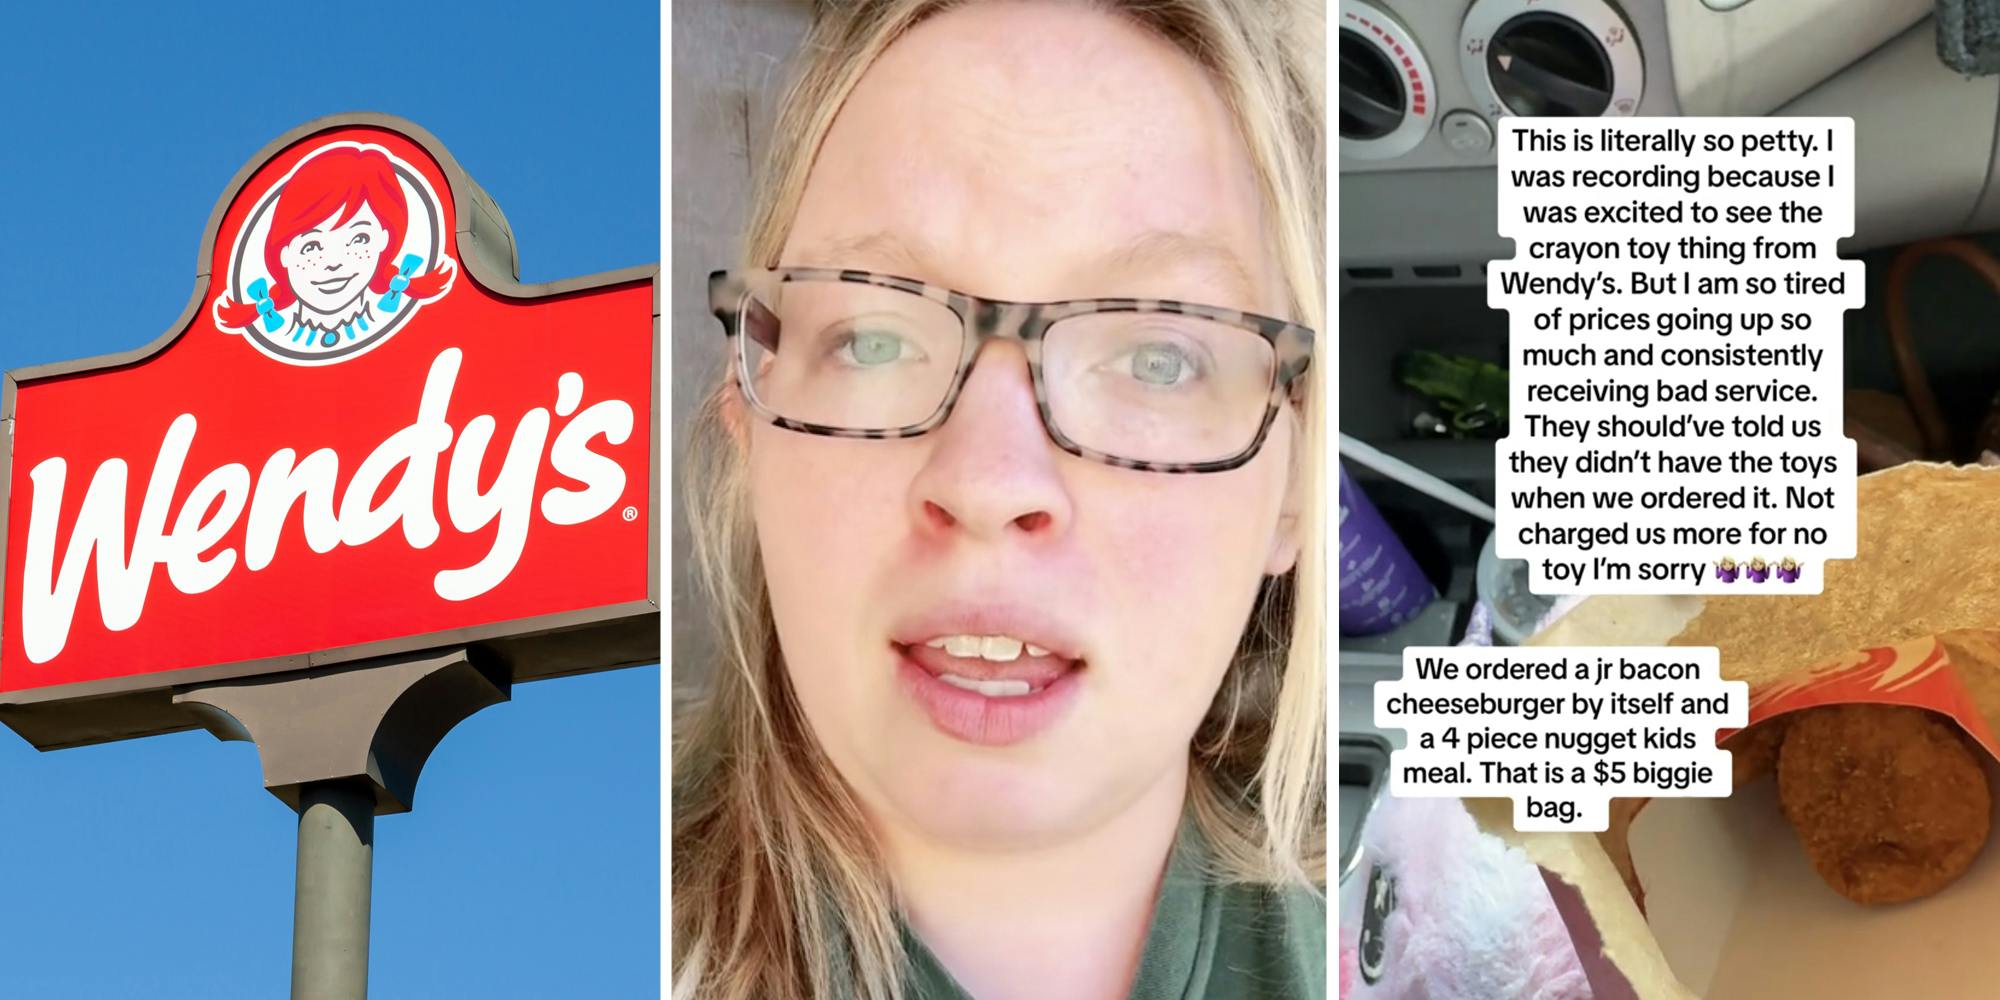 Wendy's sign(l), Woman talking(c), Bag of chicken nuggets with text "This is literally so petty. I was recording because I was excited to see the crayon toy thing from Wendy's. But I am so tired of prices going up so much and consistently receiving bad service. They should've told us they didn't have the toys when we ordered it. Not charged us more for no toy I'm sorry (shrugging emoji x3) We ordered a jr. bacon cheeseburger by itself and a 4 piece nugget kids meal. That is a $5 biggie bag."